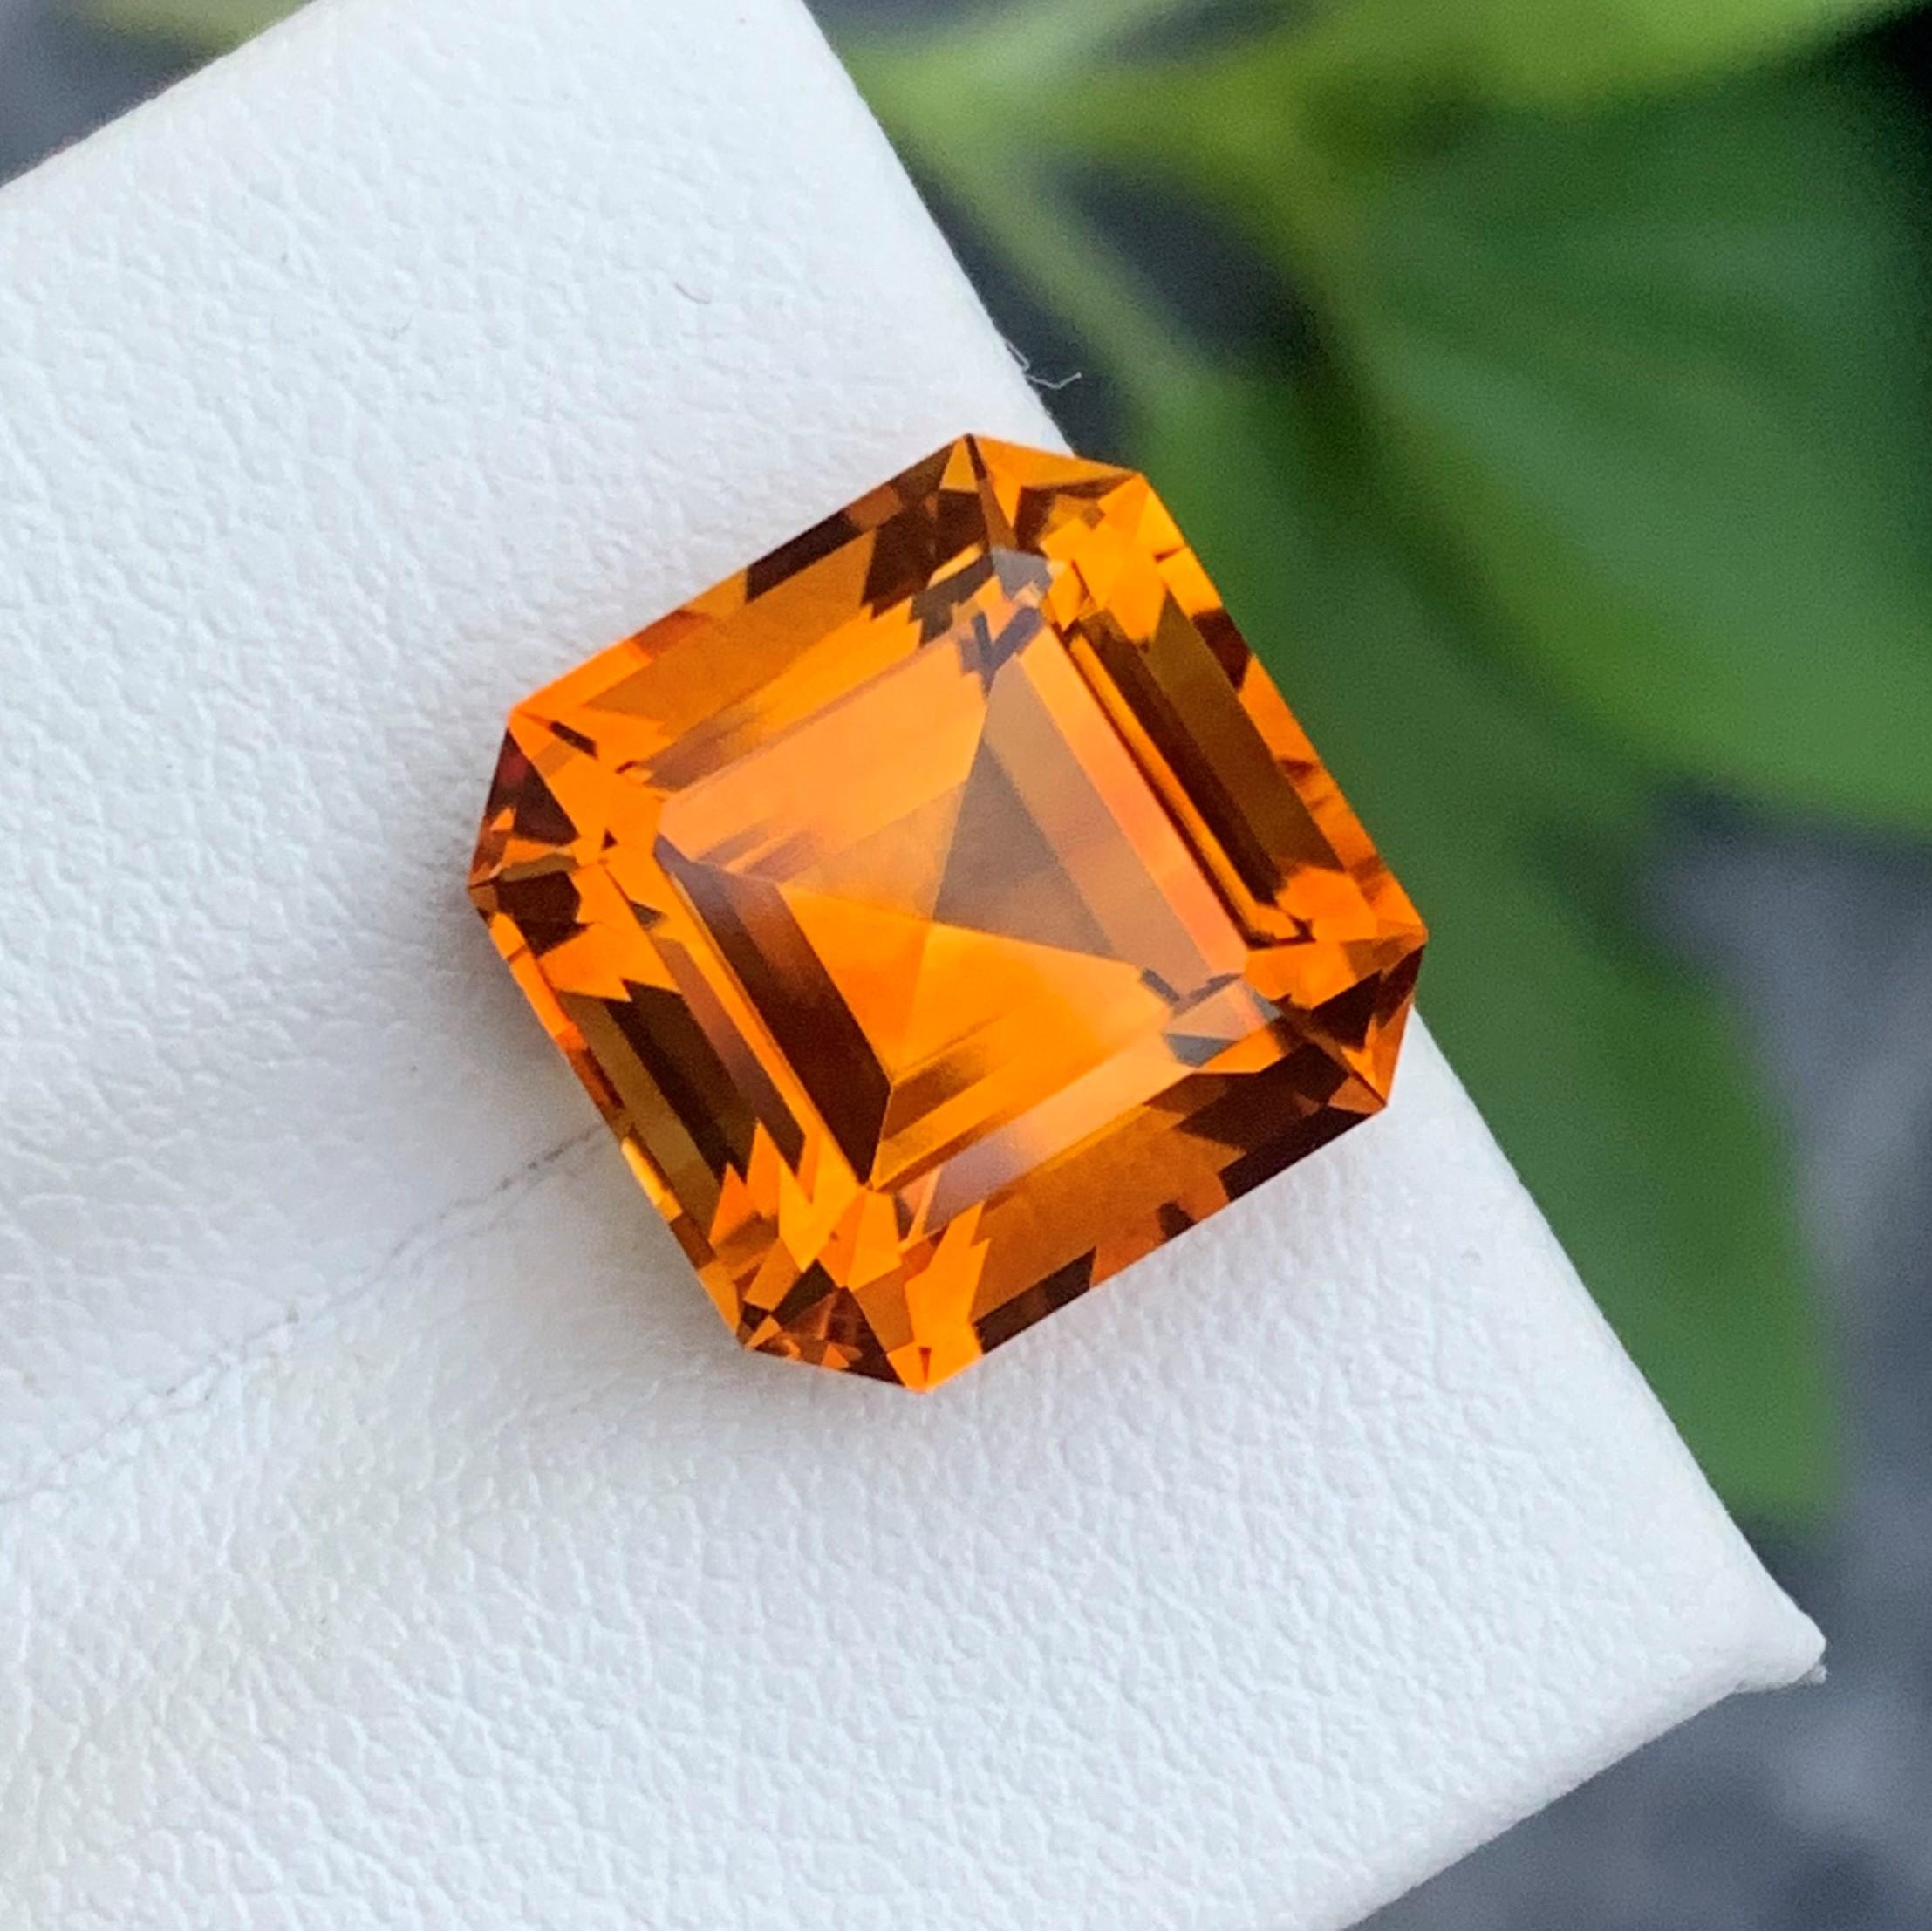 Faceted Mandarin Citrine
Weight : 8.15 Carats
Dimensions : 11.9x11.9x8.9 Mm
Clarity : Loupe Clean 
Origin : Brazil
Color: Orange 
Shape: Asscher
Certificate: On Demand
Month: November
.
The Many Healing Properties of Citrine
Increase Optimism, And